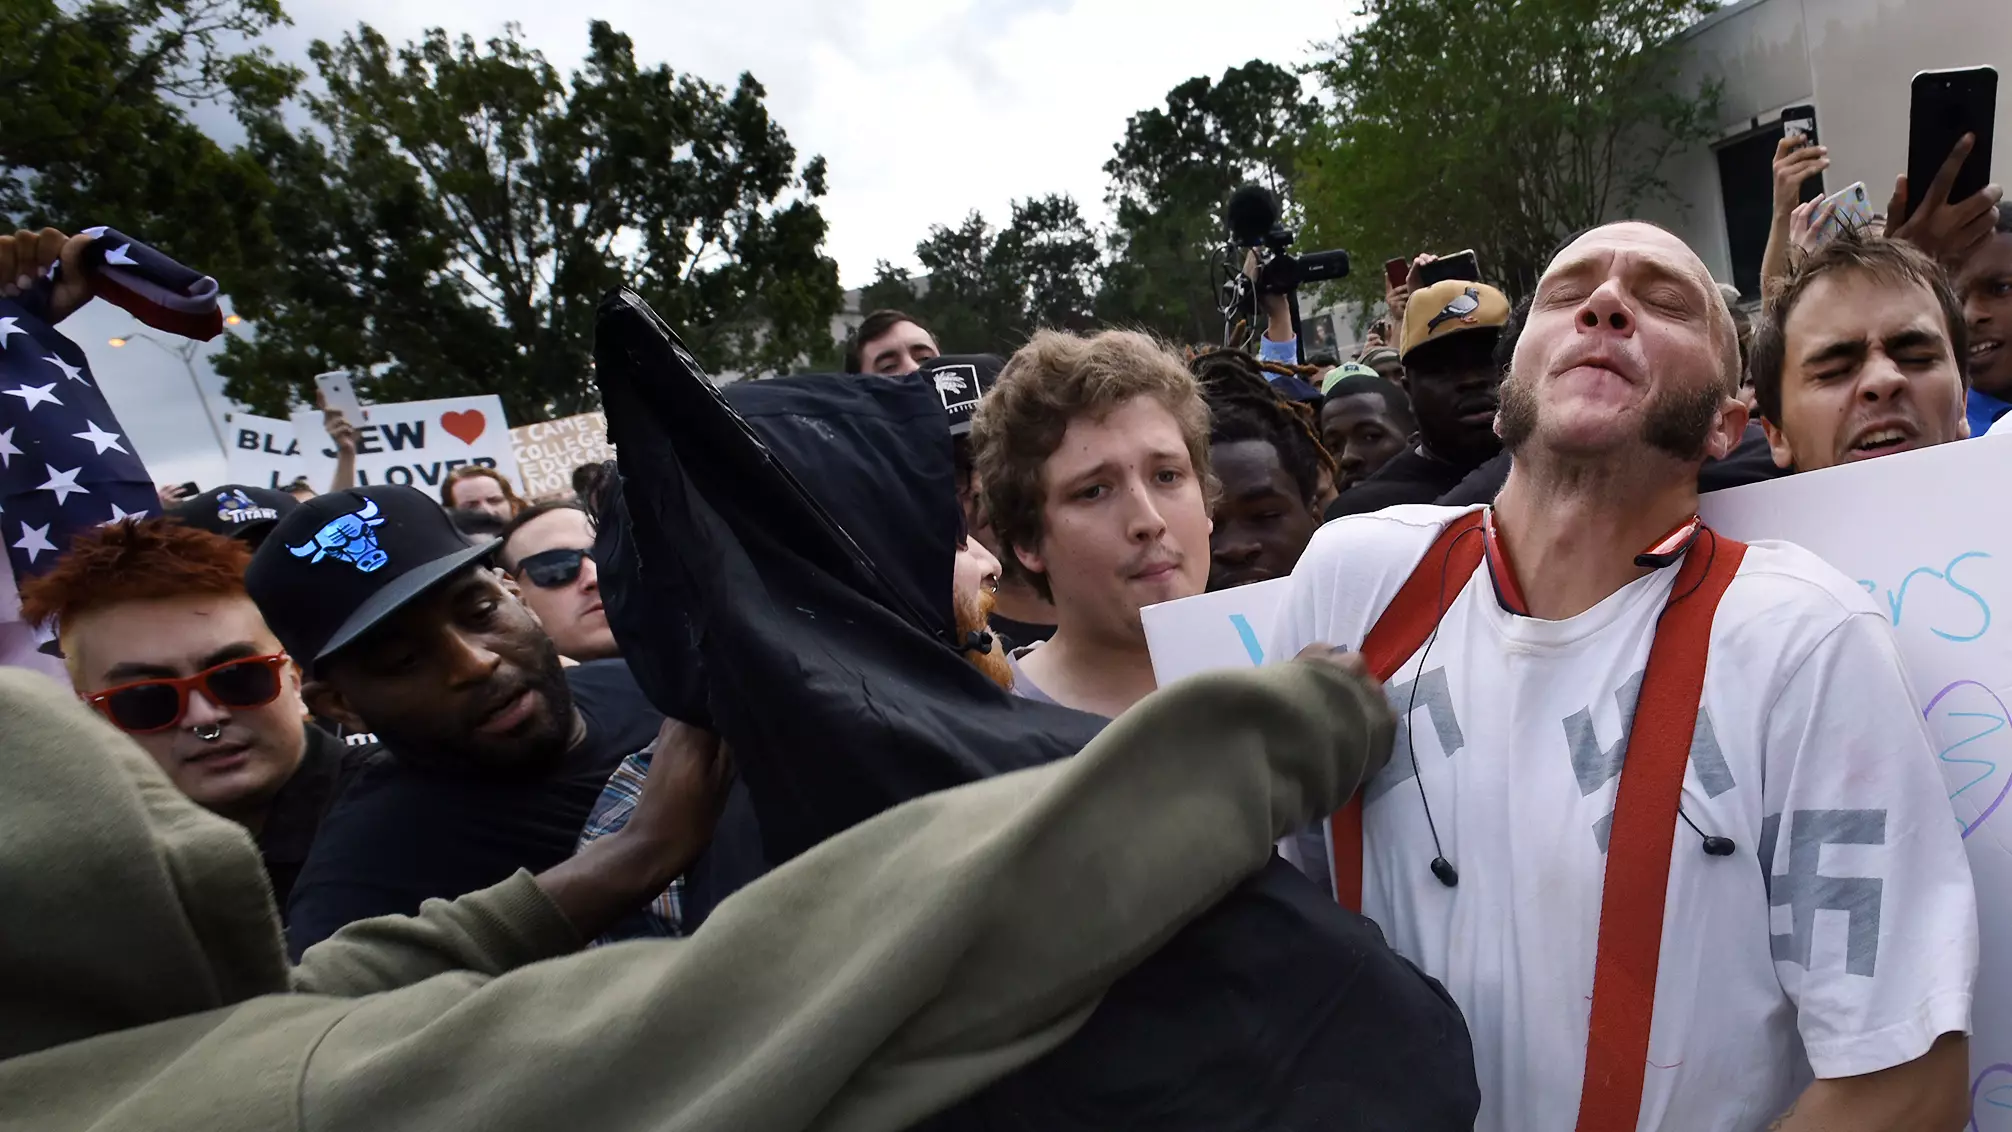 Black Protester Gives Neo-Nazi A Hug And Stops His From Being Attacked